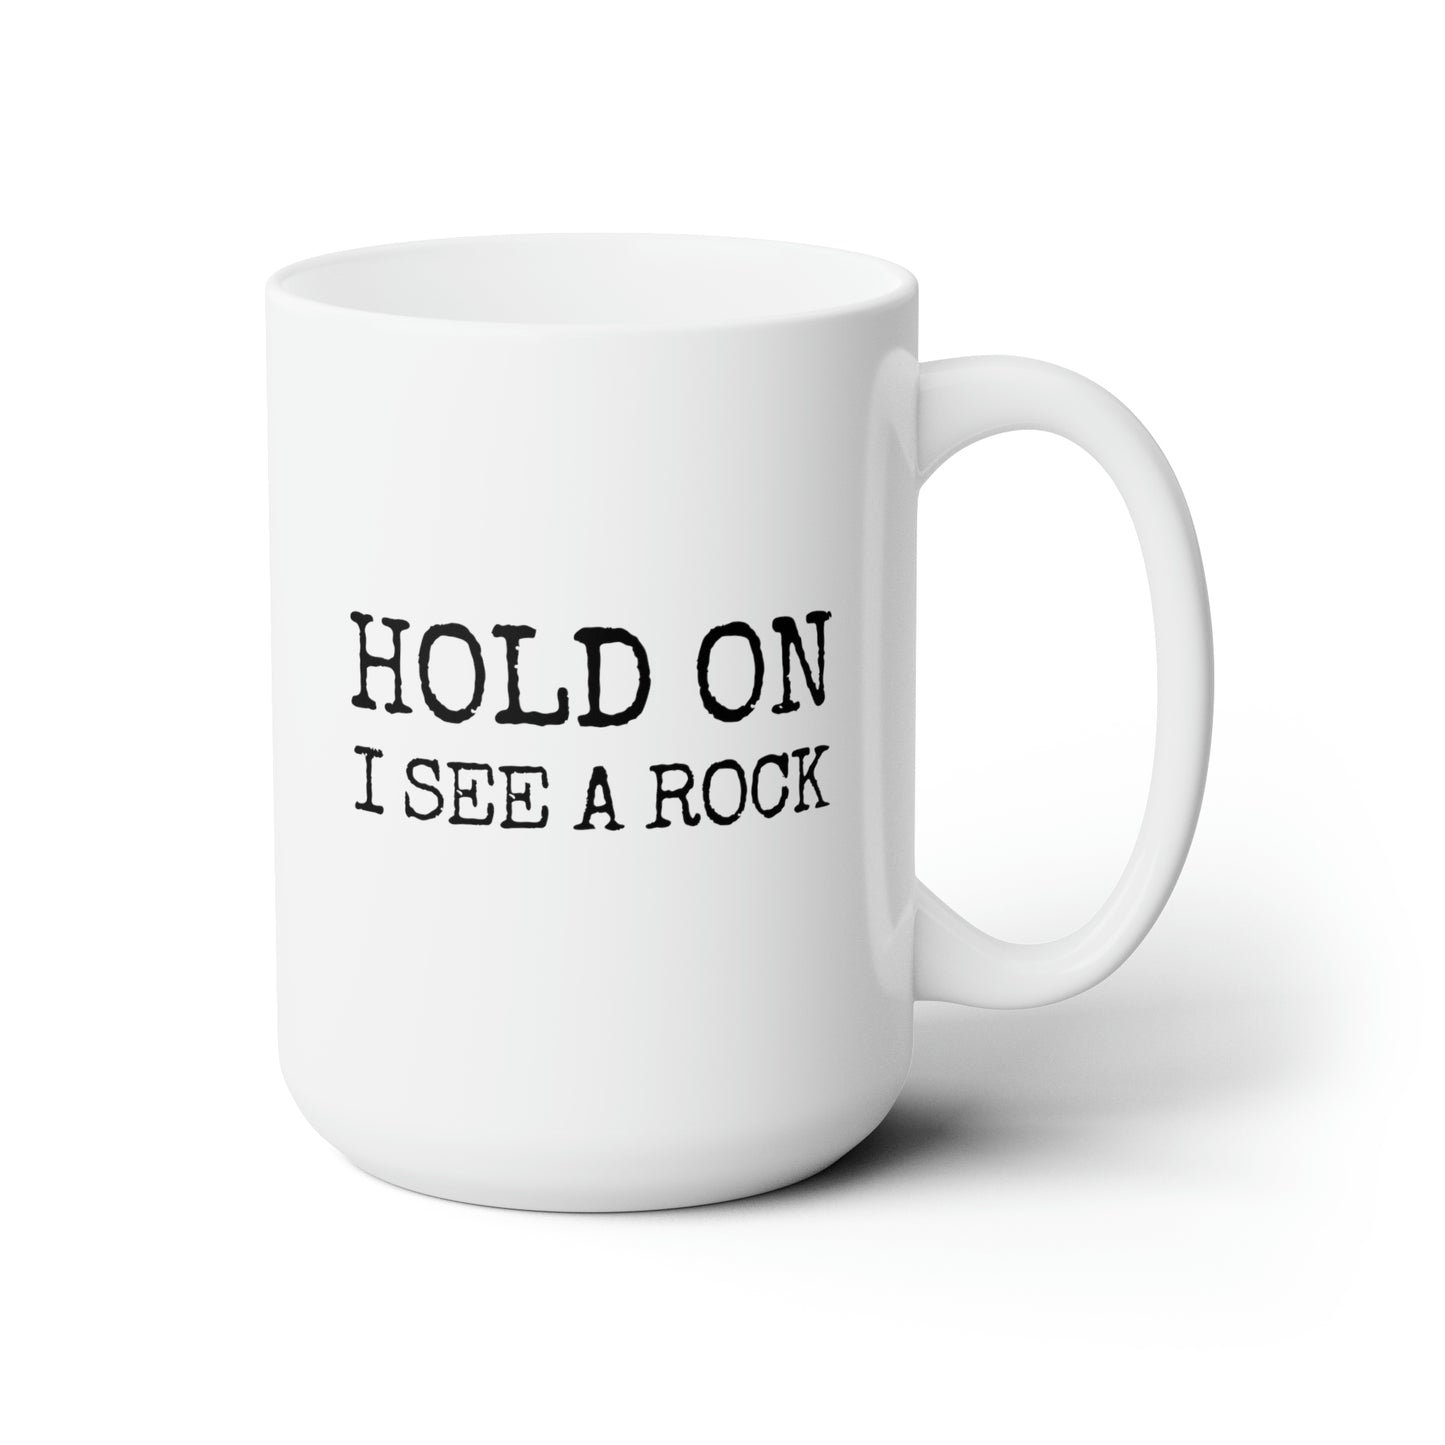 Hold On I See A Rock 15oz white funny large coffee mug gift for geologist science rock lover geology teacher collector rockhound stone waveywares wavey wares wavywares wavy wares